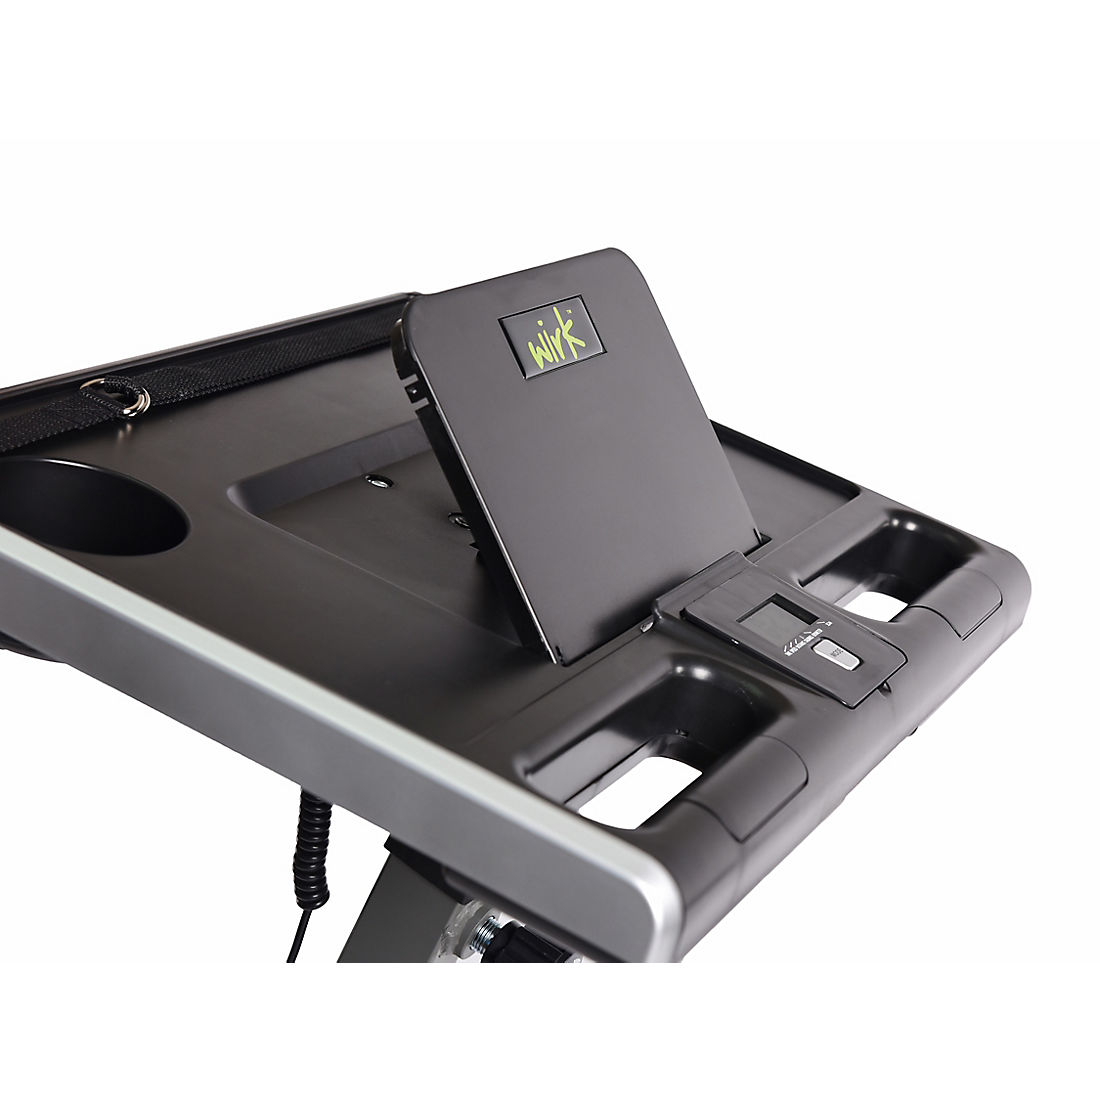 Stamina 85-2221 Wirk Ride Cycling Workstation for sale online 